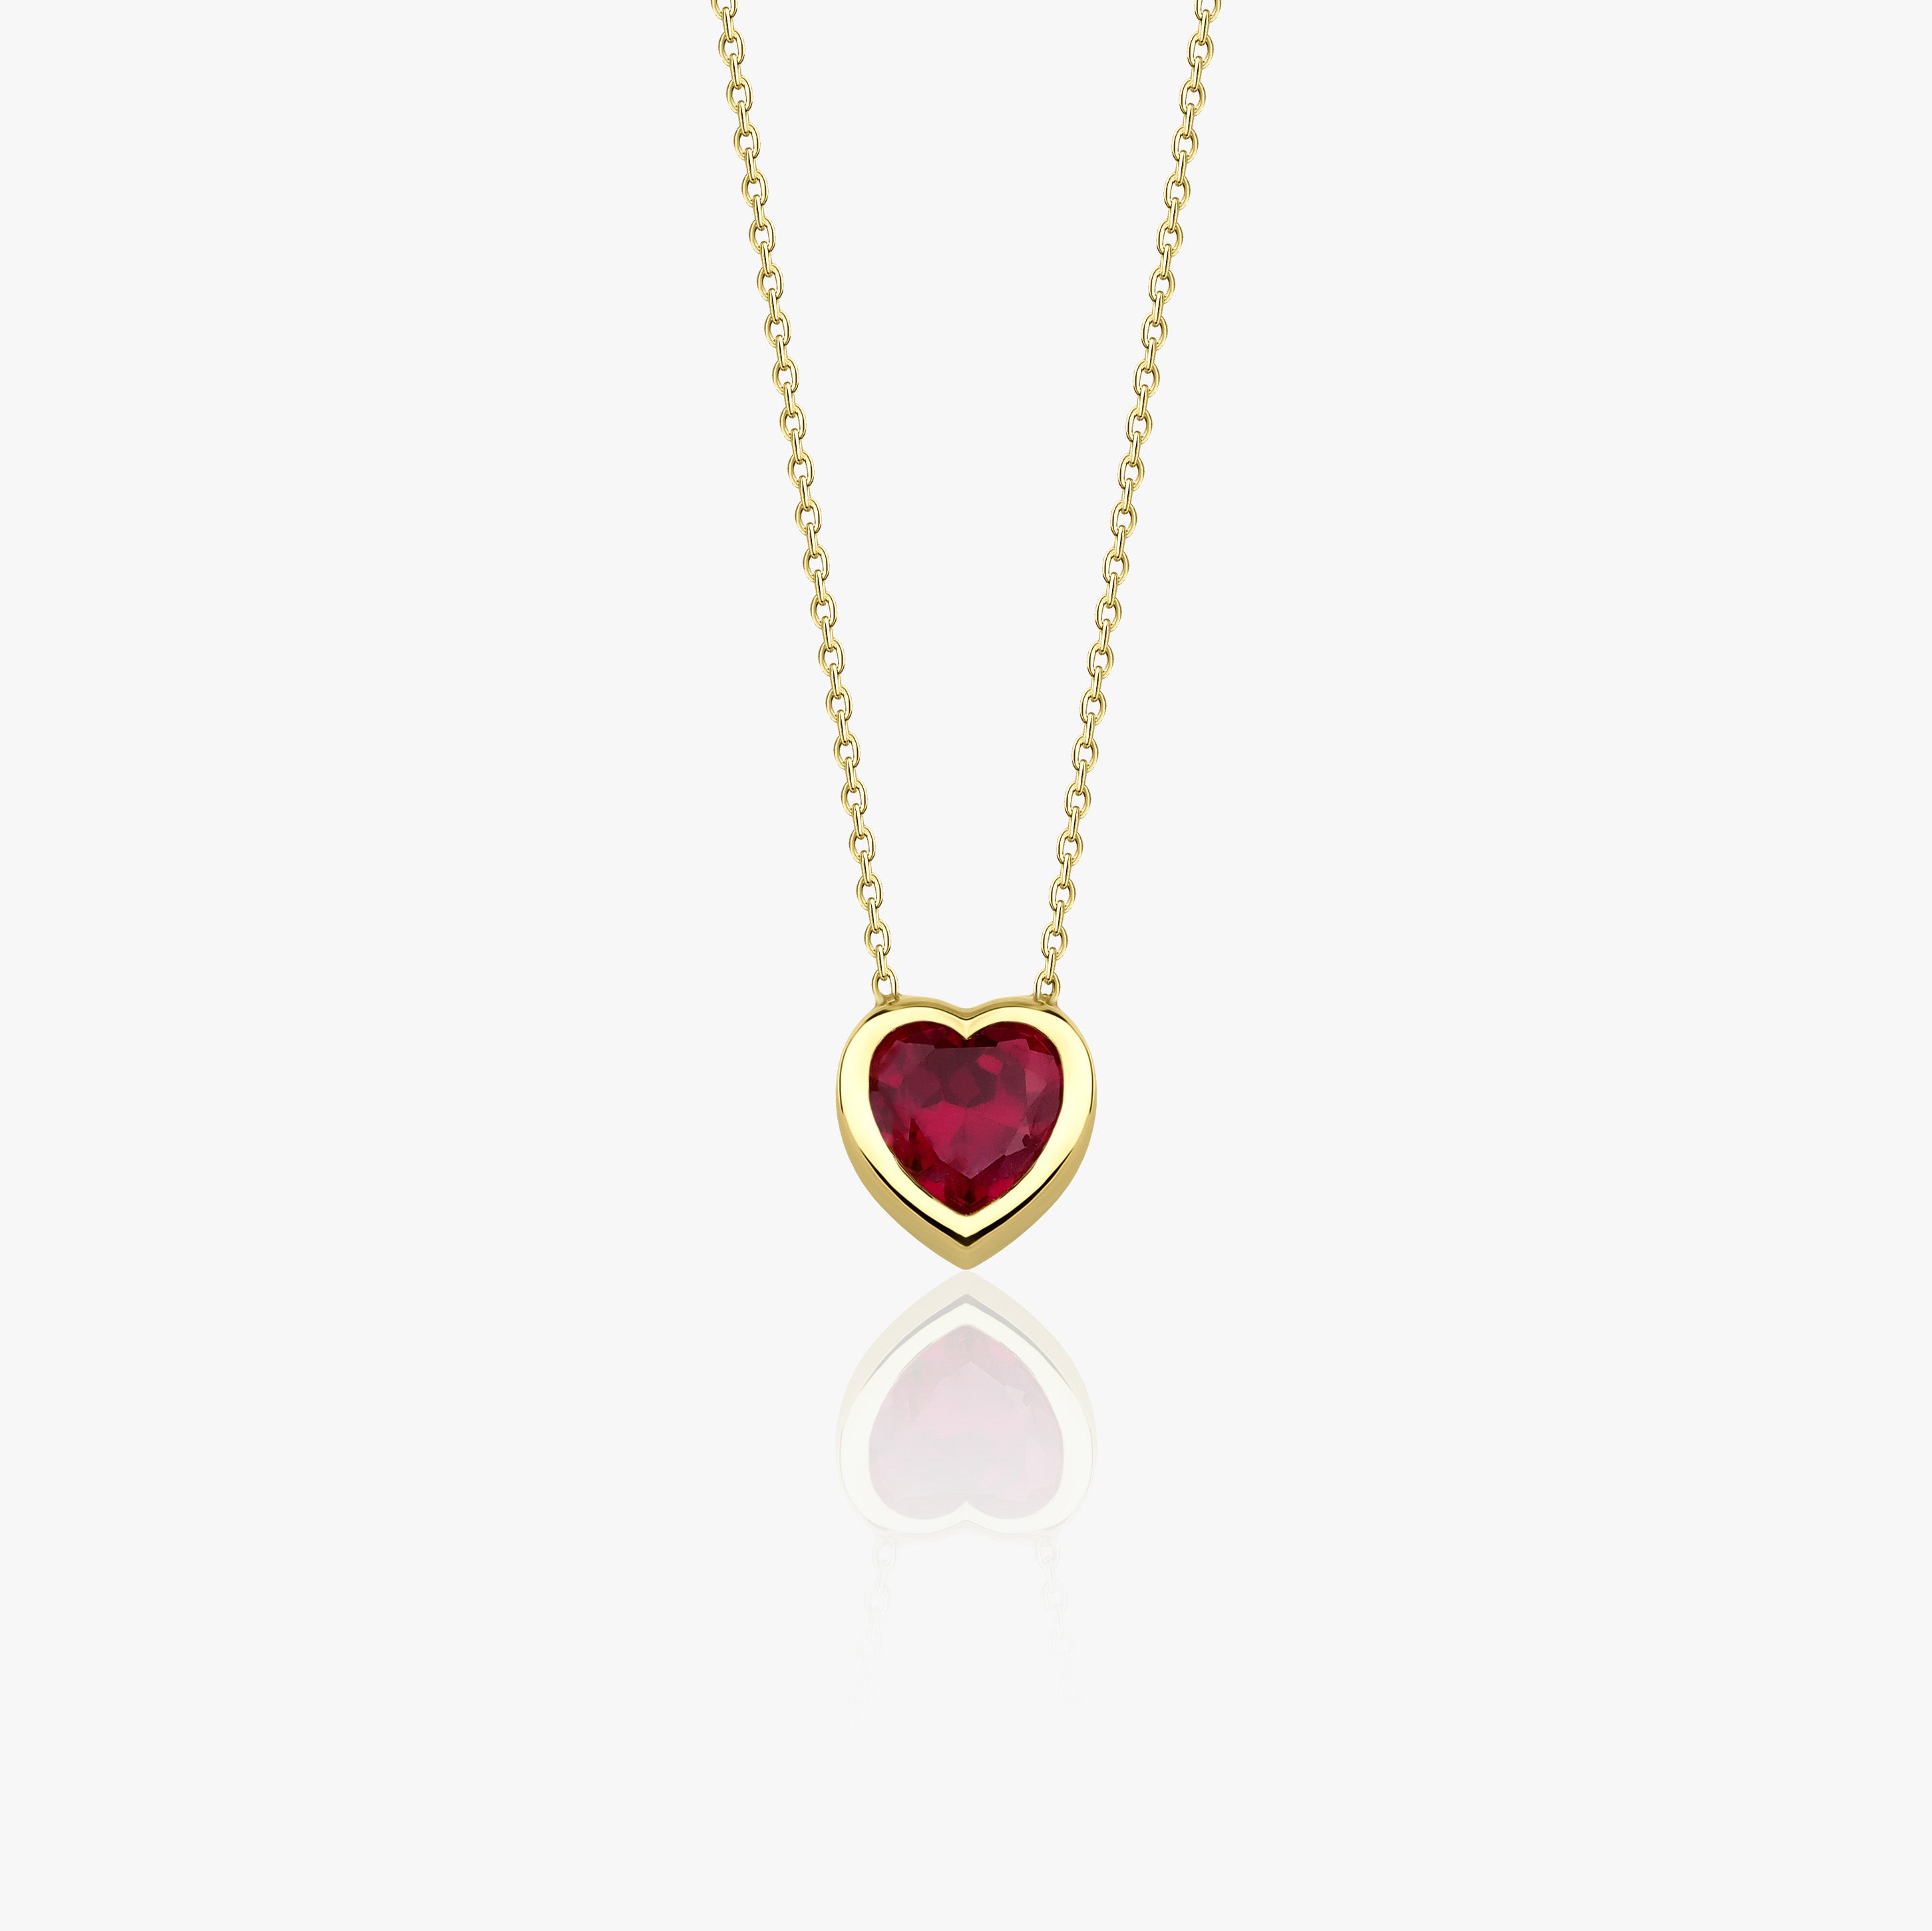 Red Gemstone Heart Necklace in 14K Gold